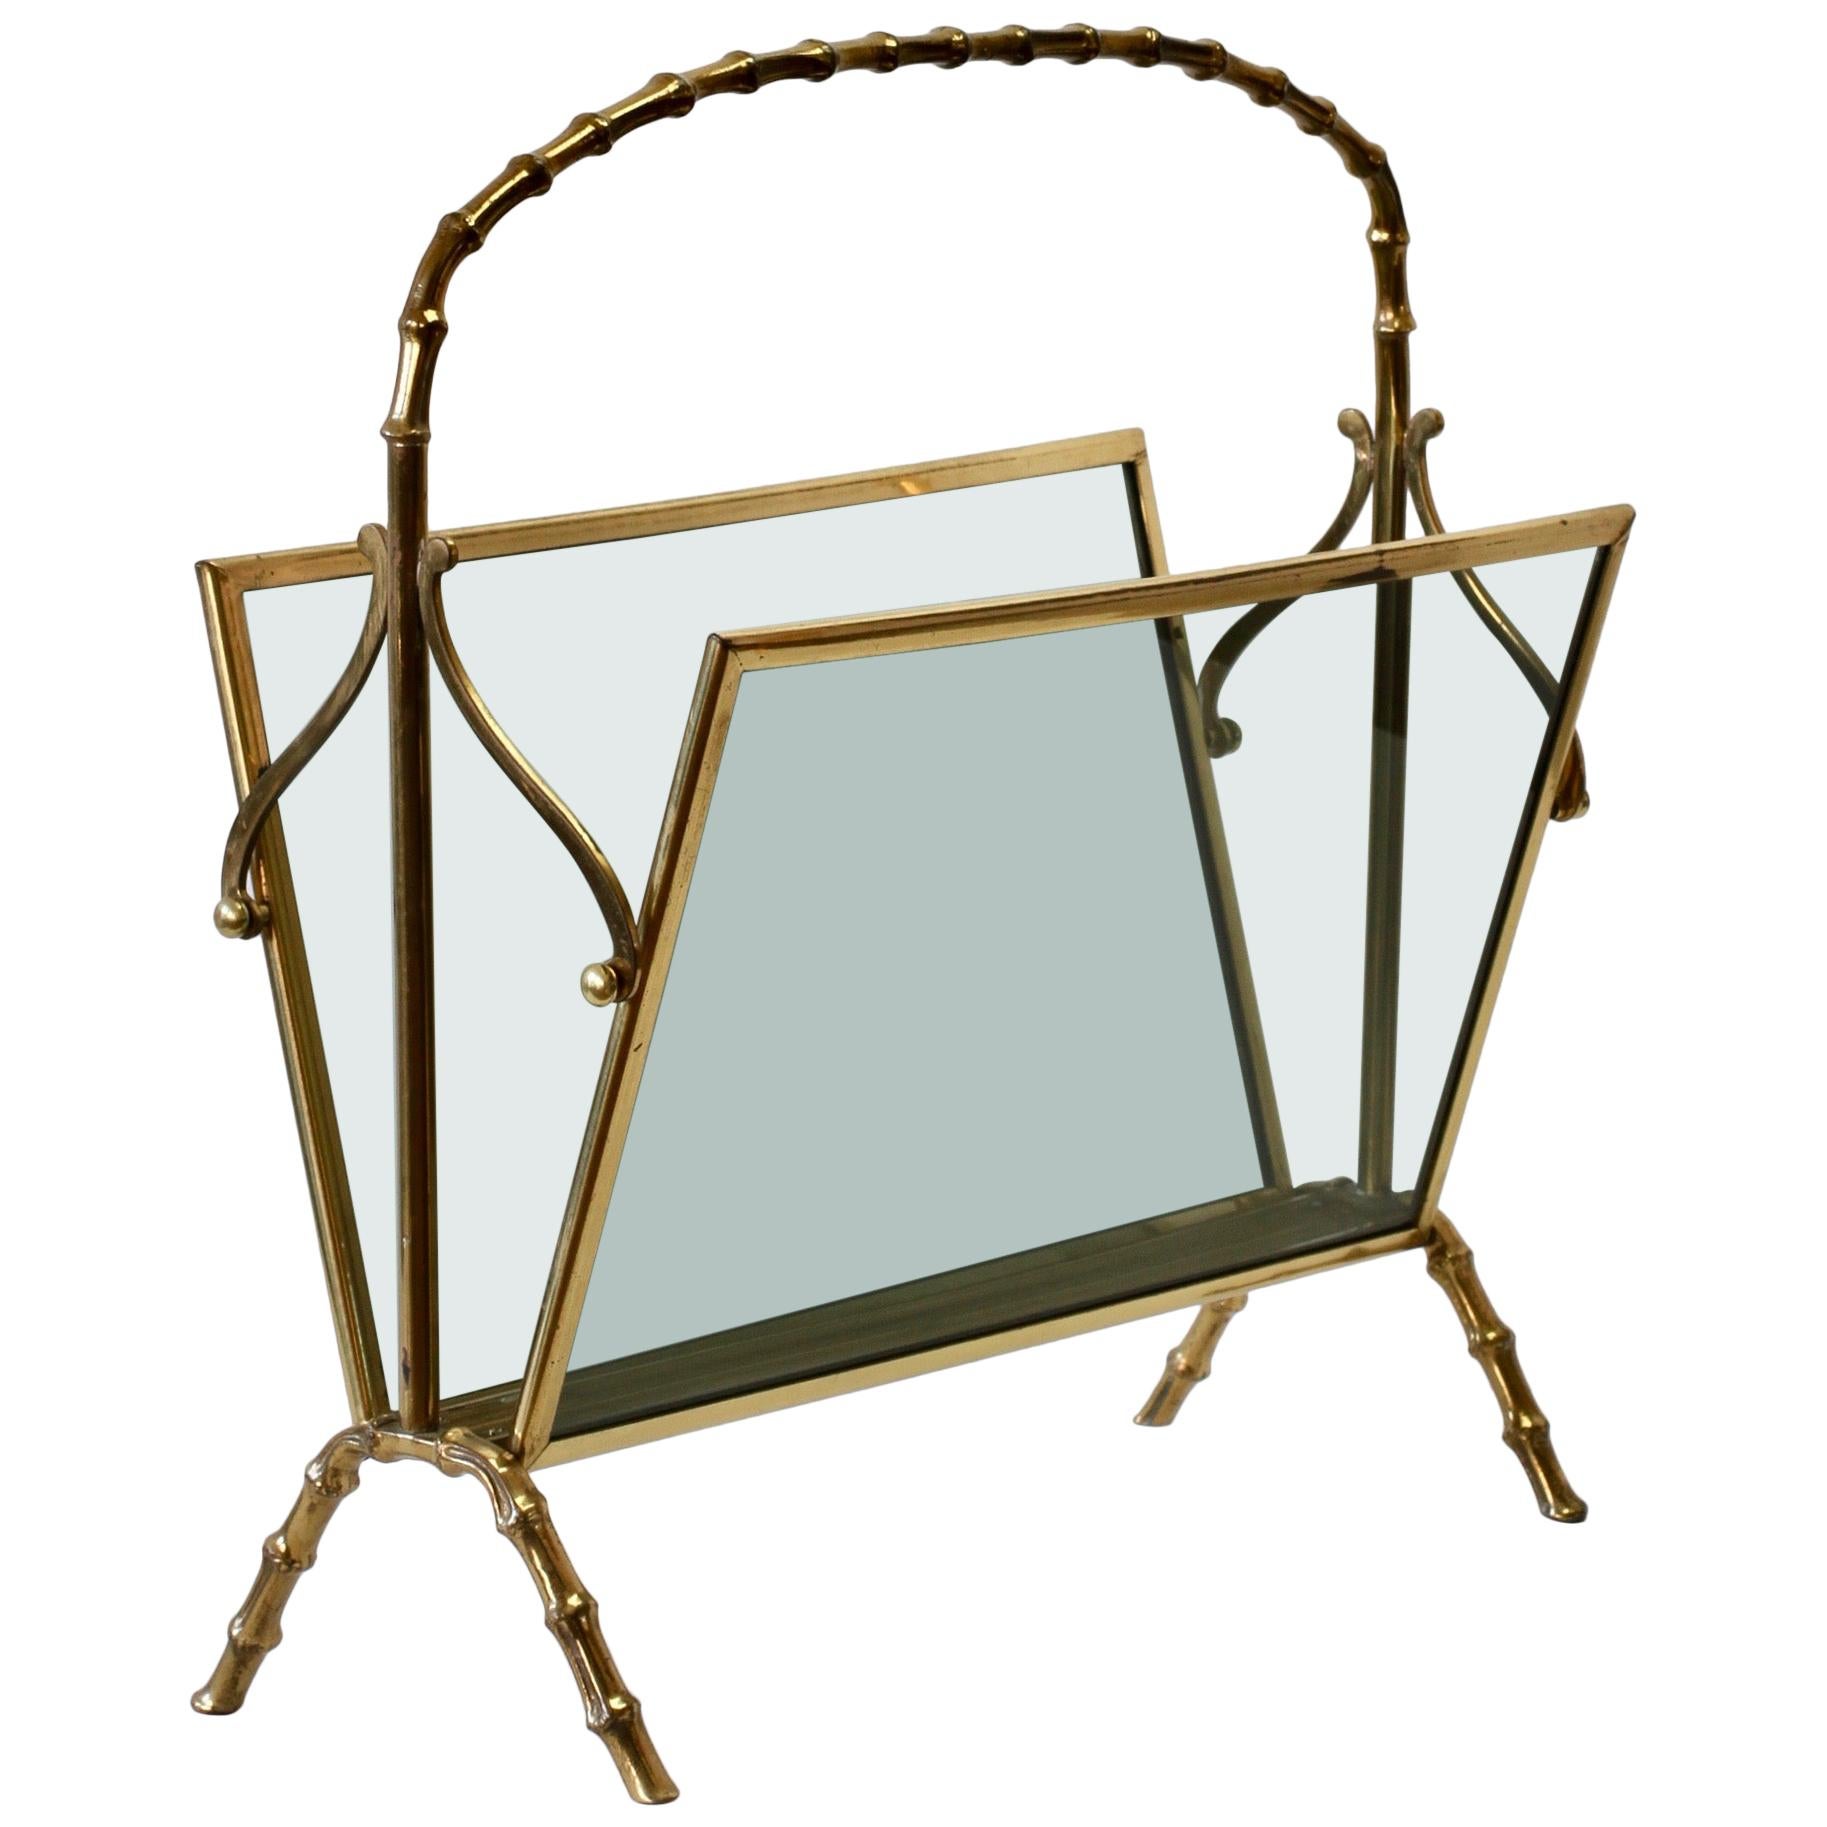 Maison Baguès Attributed Cast Brass Faux Bamboo Magazine Rack or Newspaper Stand For Sale